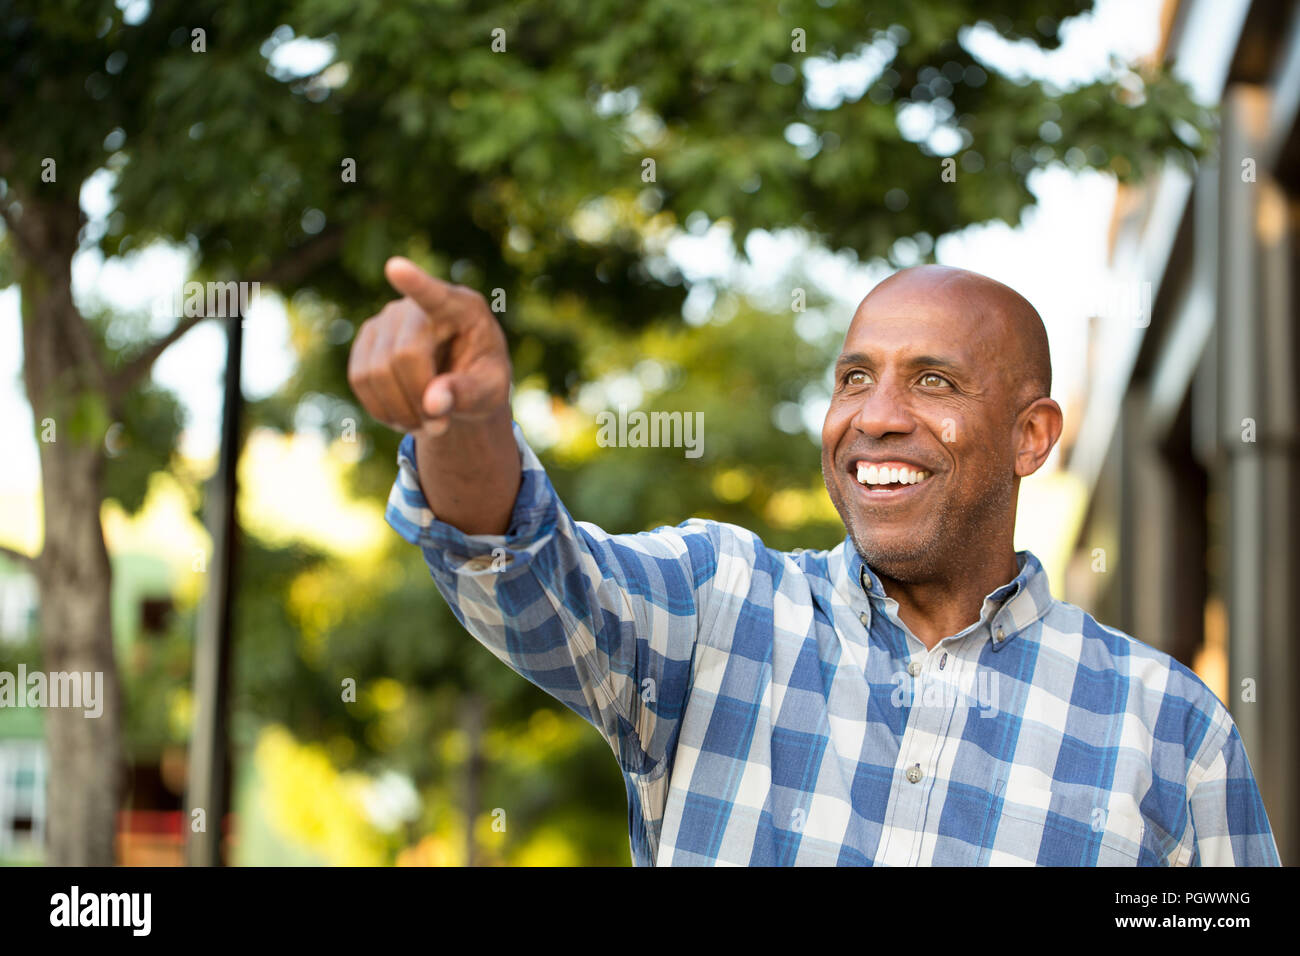 African American man smiling and pointing away from the camera. Stock Photo